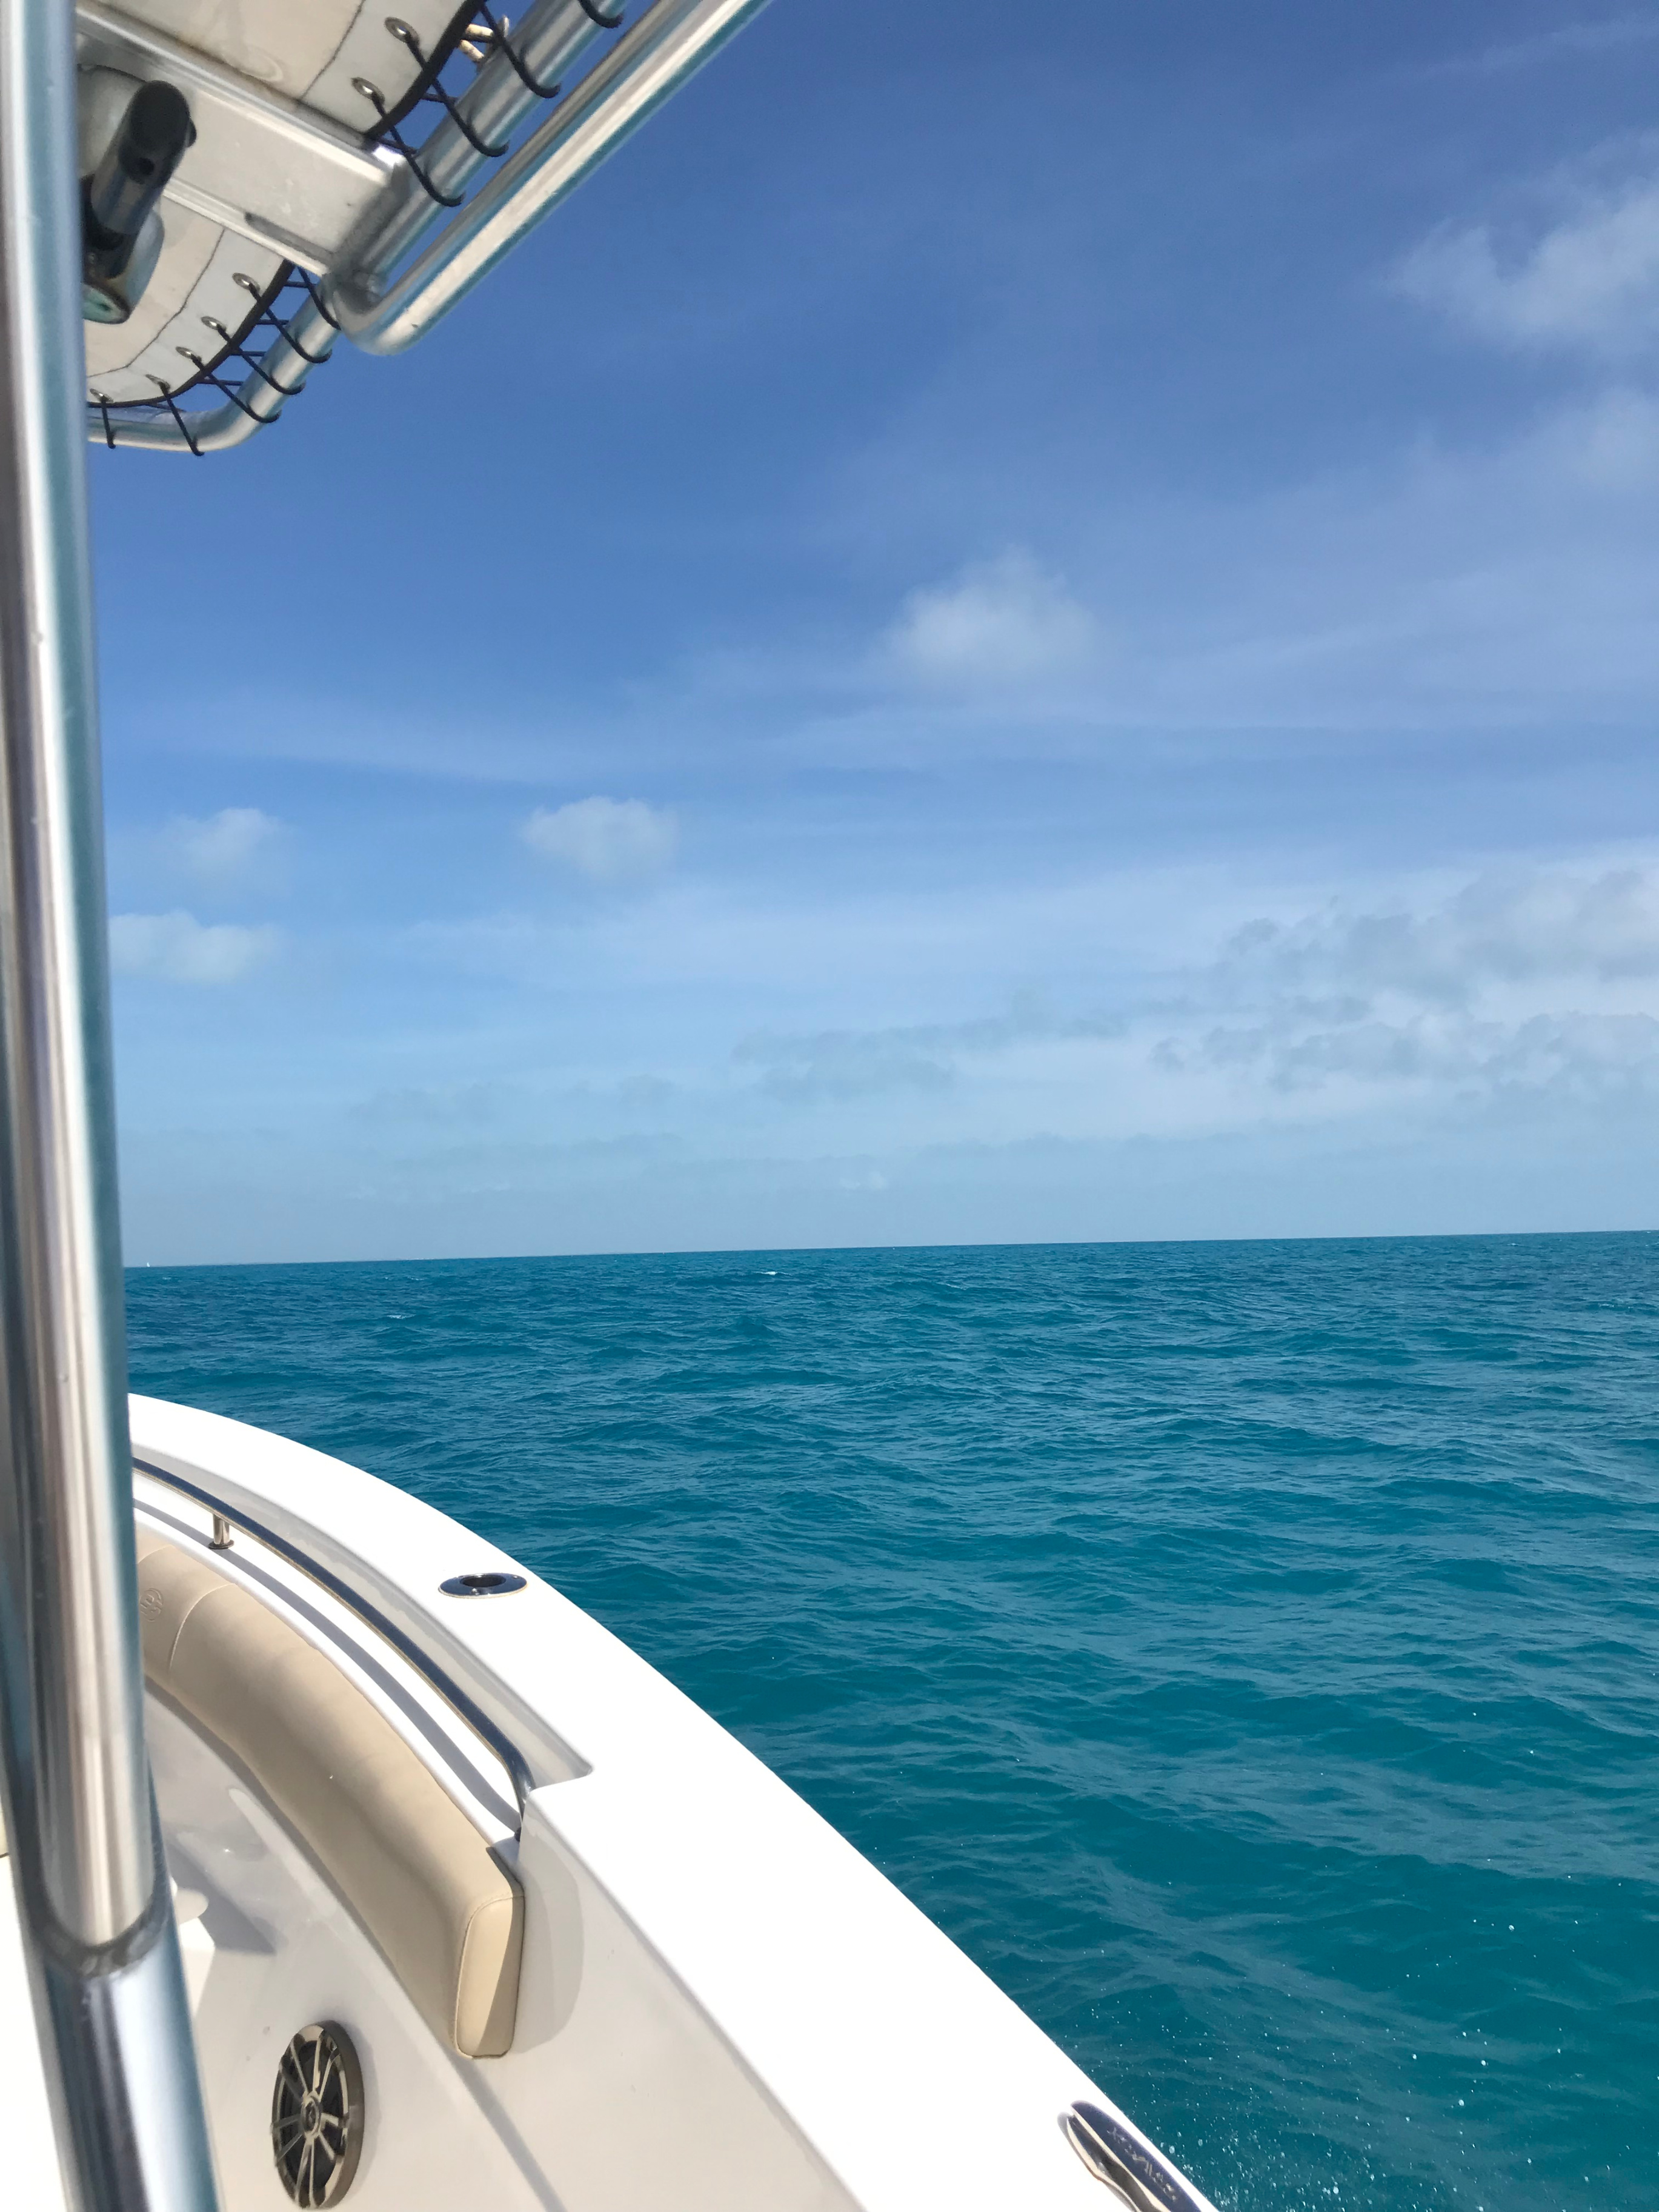 Snorkeling off the coast of Key West